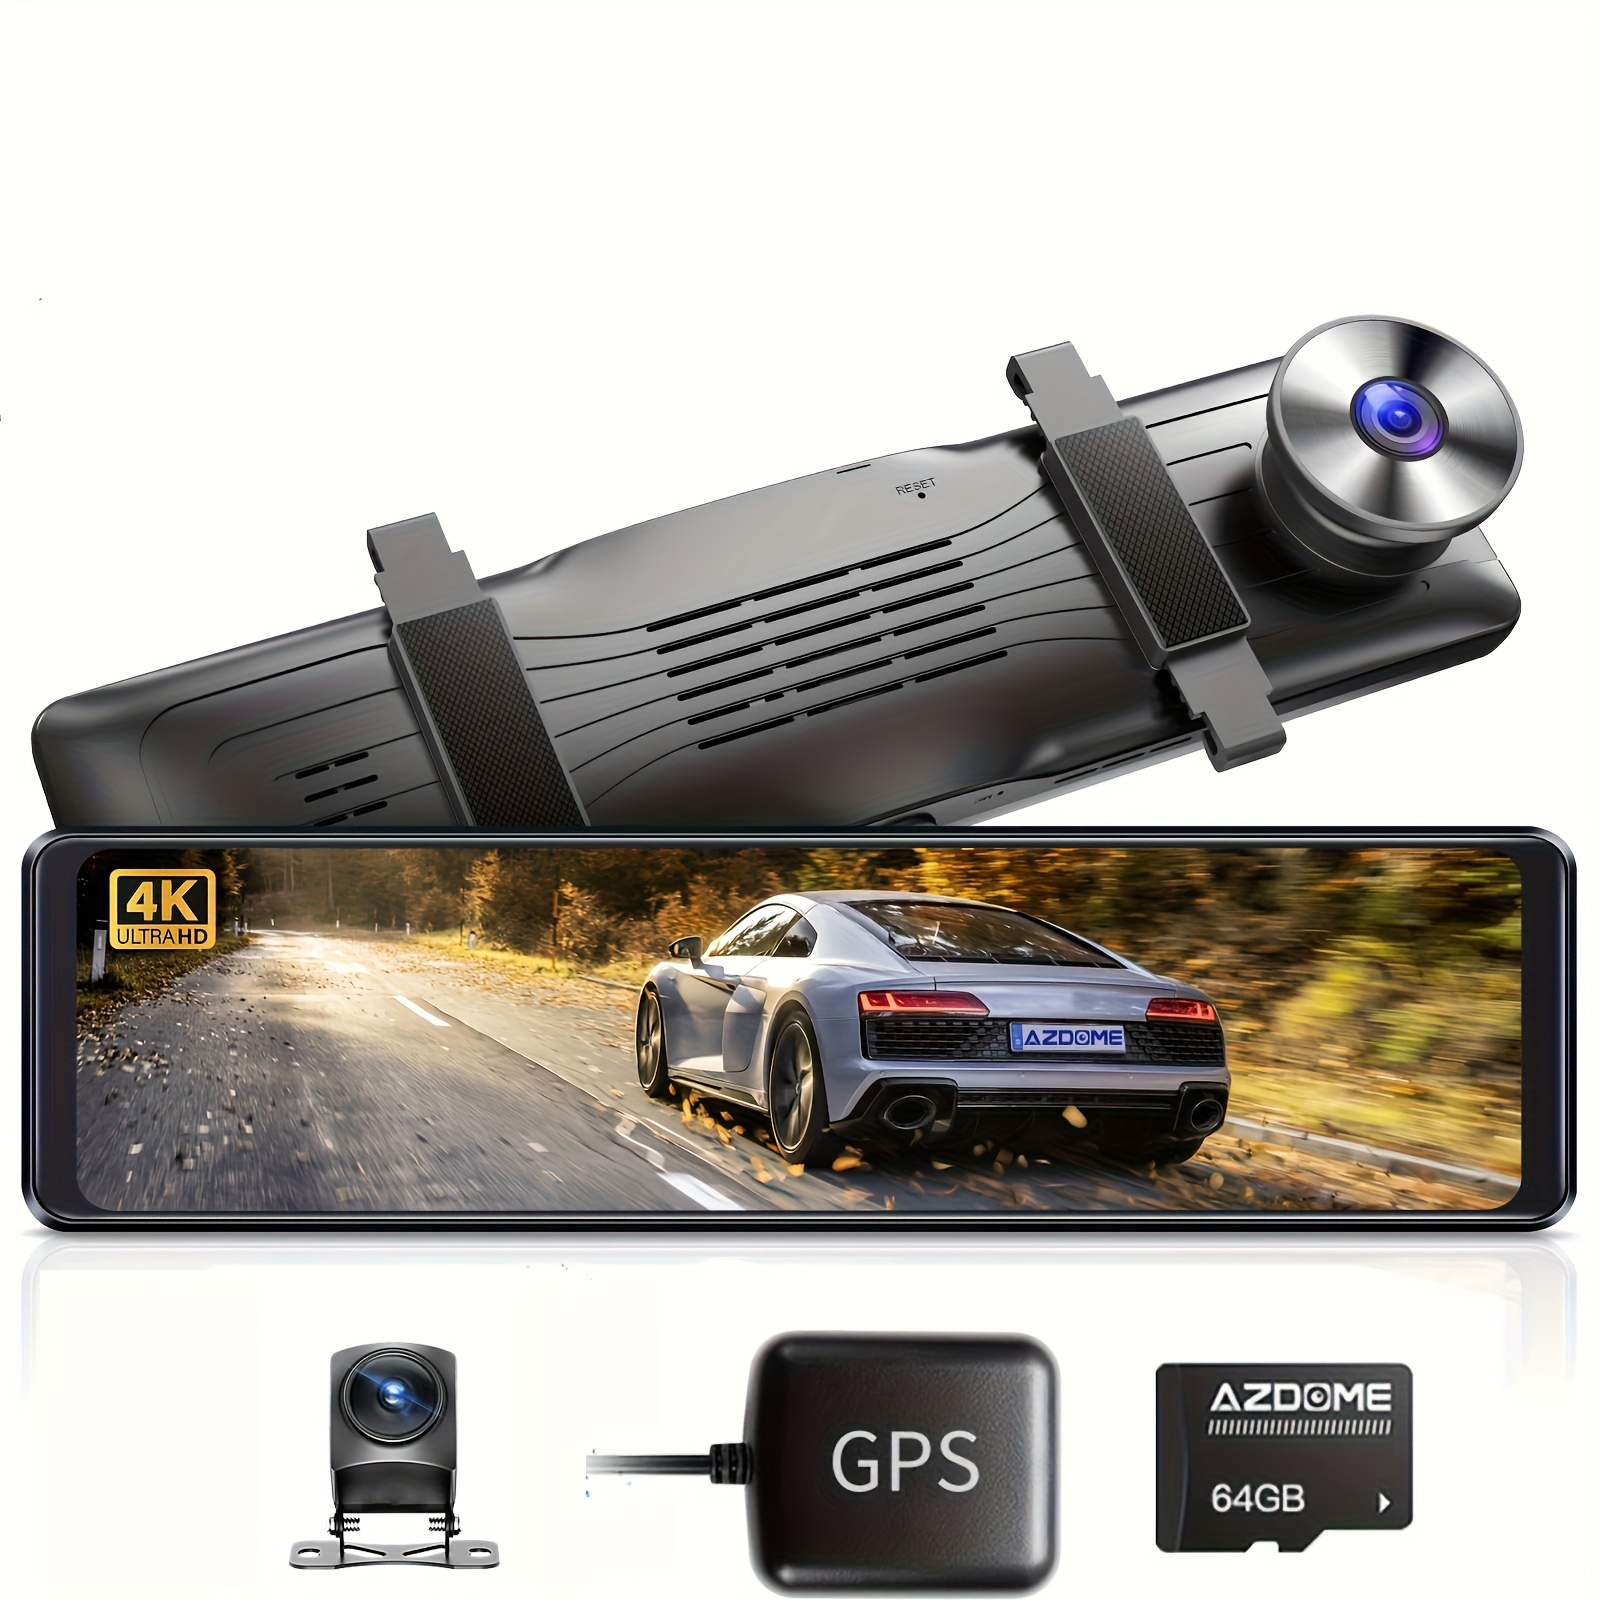 

Azdome 12" 4k , 4k With Touch Screen, Front And Rear, Rearview Mirror Camera, Split-screen Display Rear View Mirror Camera, Dual Dash Camera For Cars, Night Vision, Parking Monitor, 64gb Card & Gps